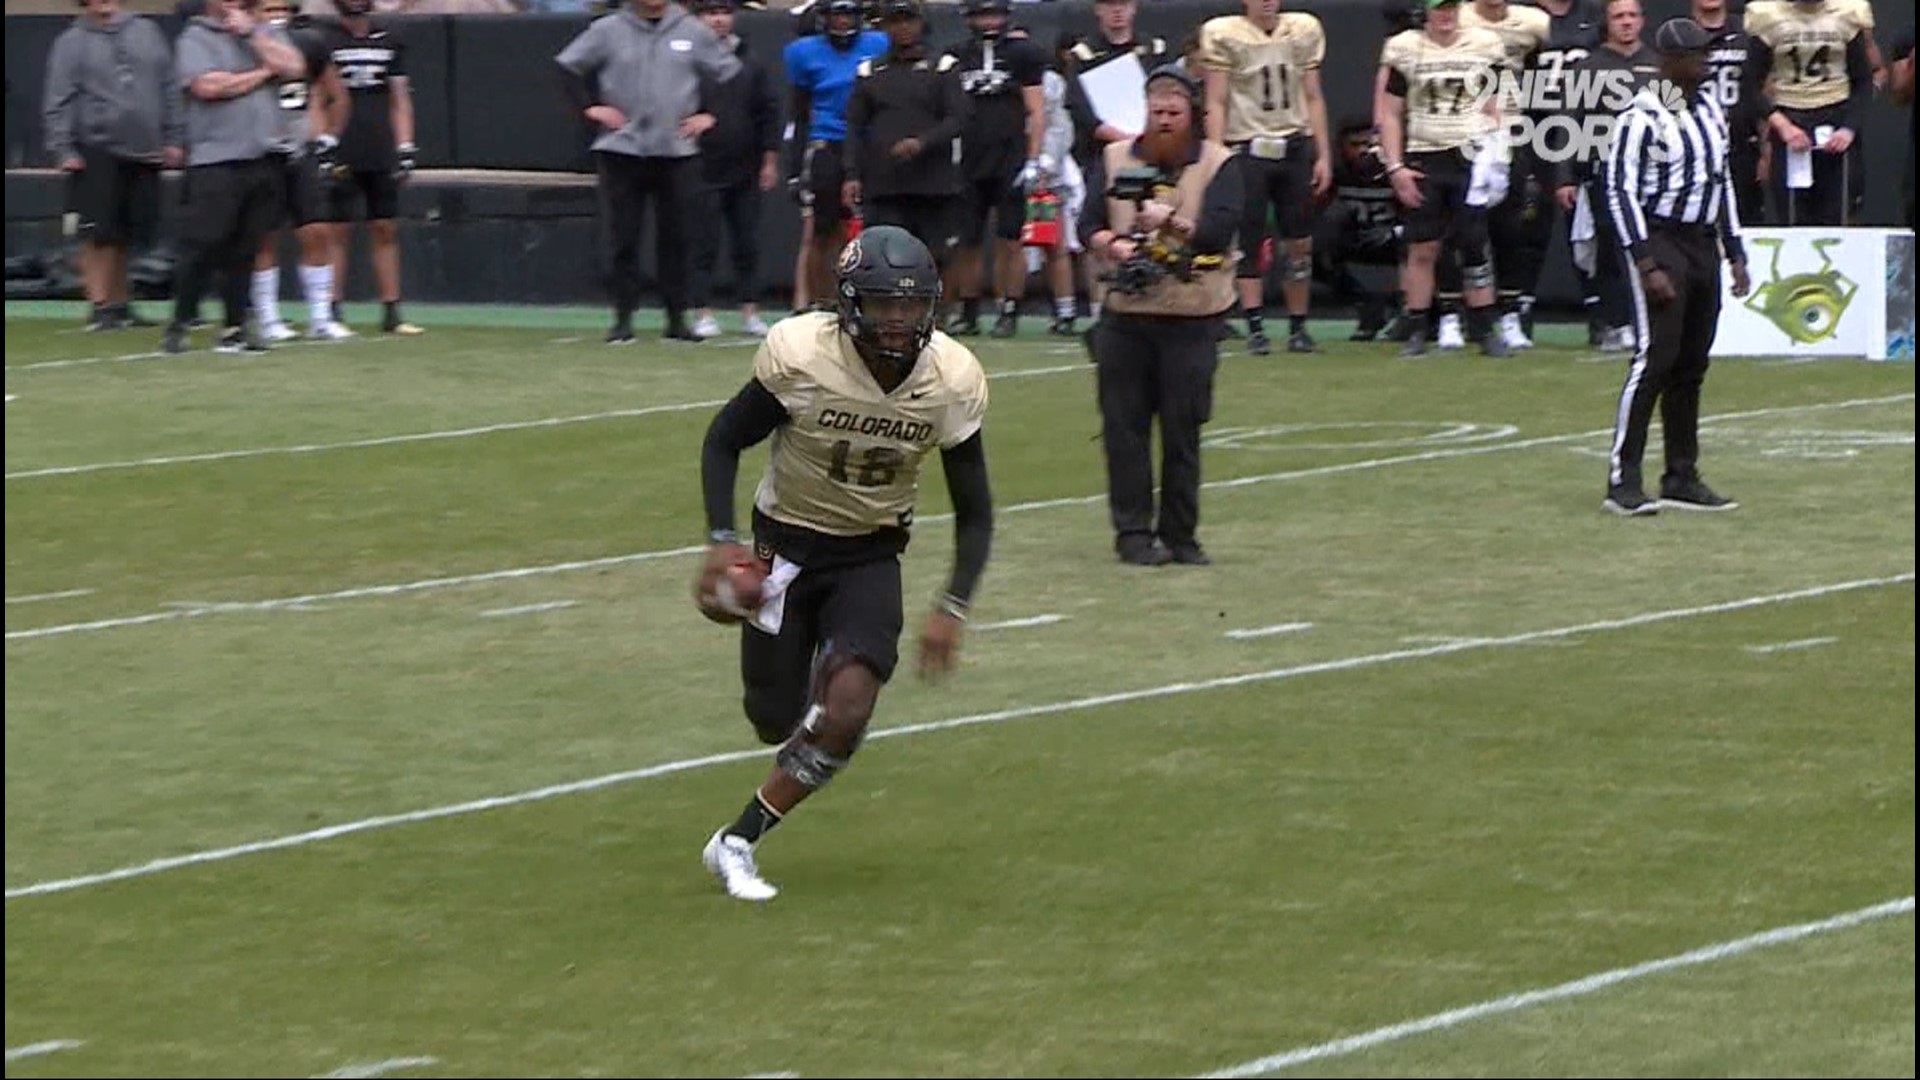 The Buffs held an intrasquad scrimmage on Saturday.